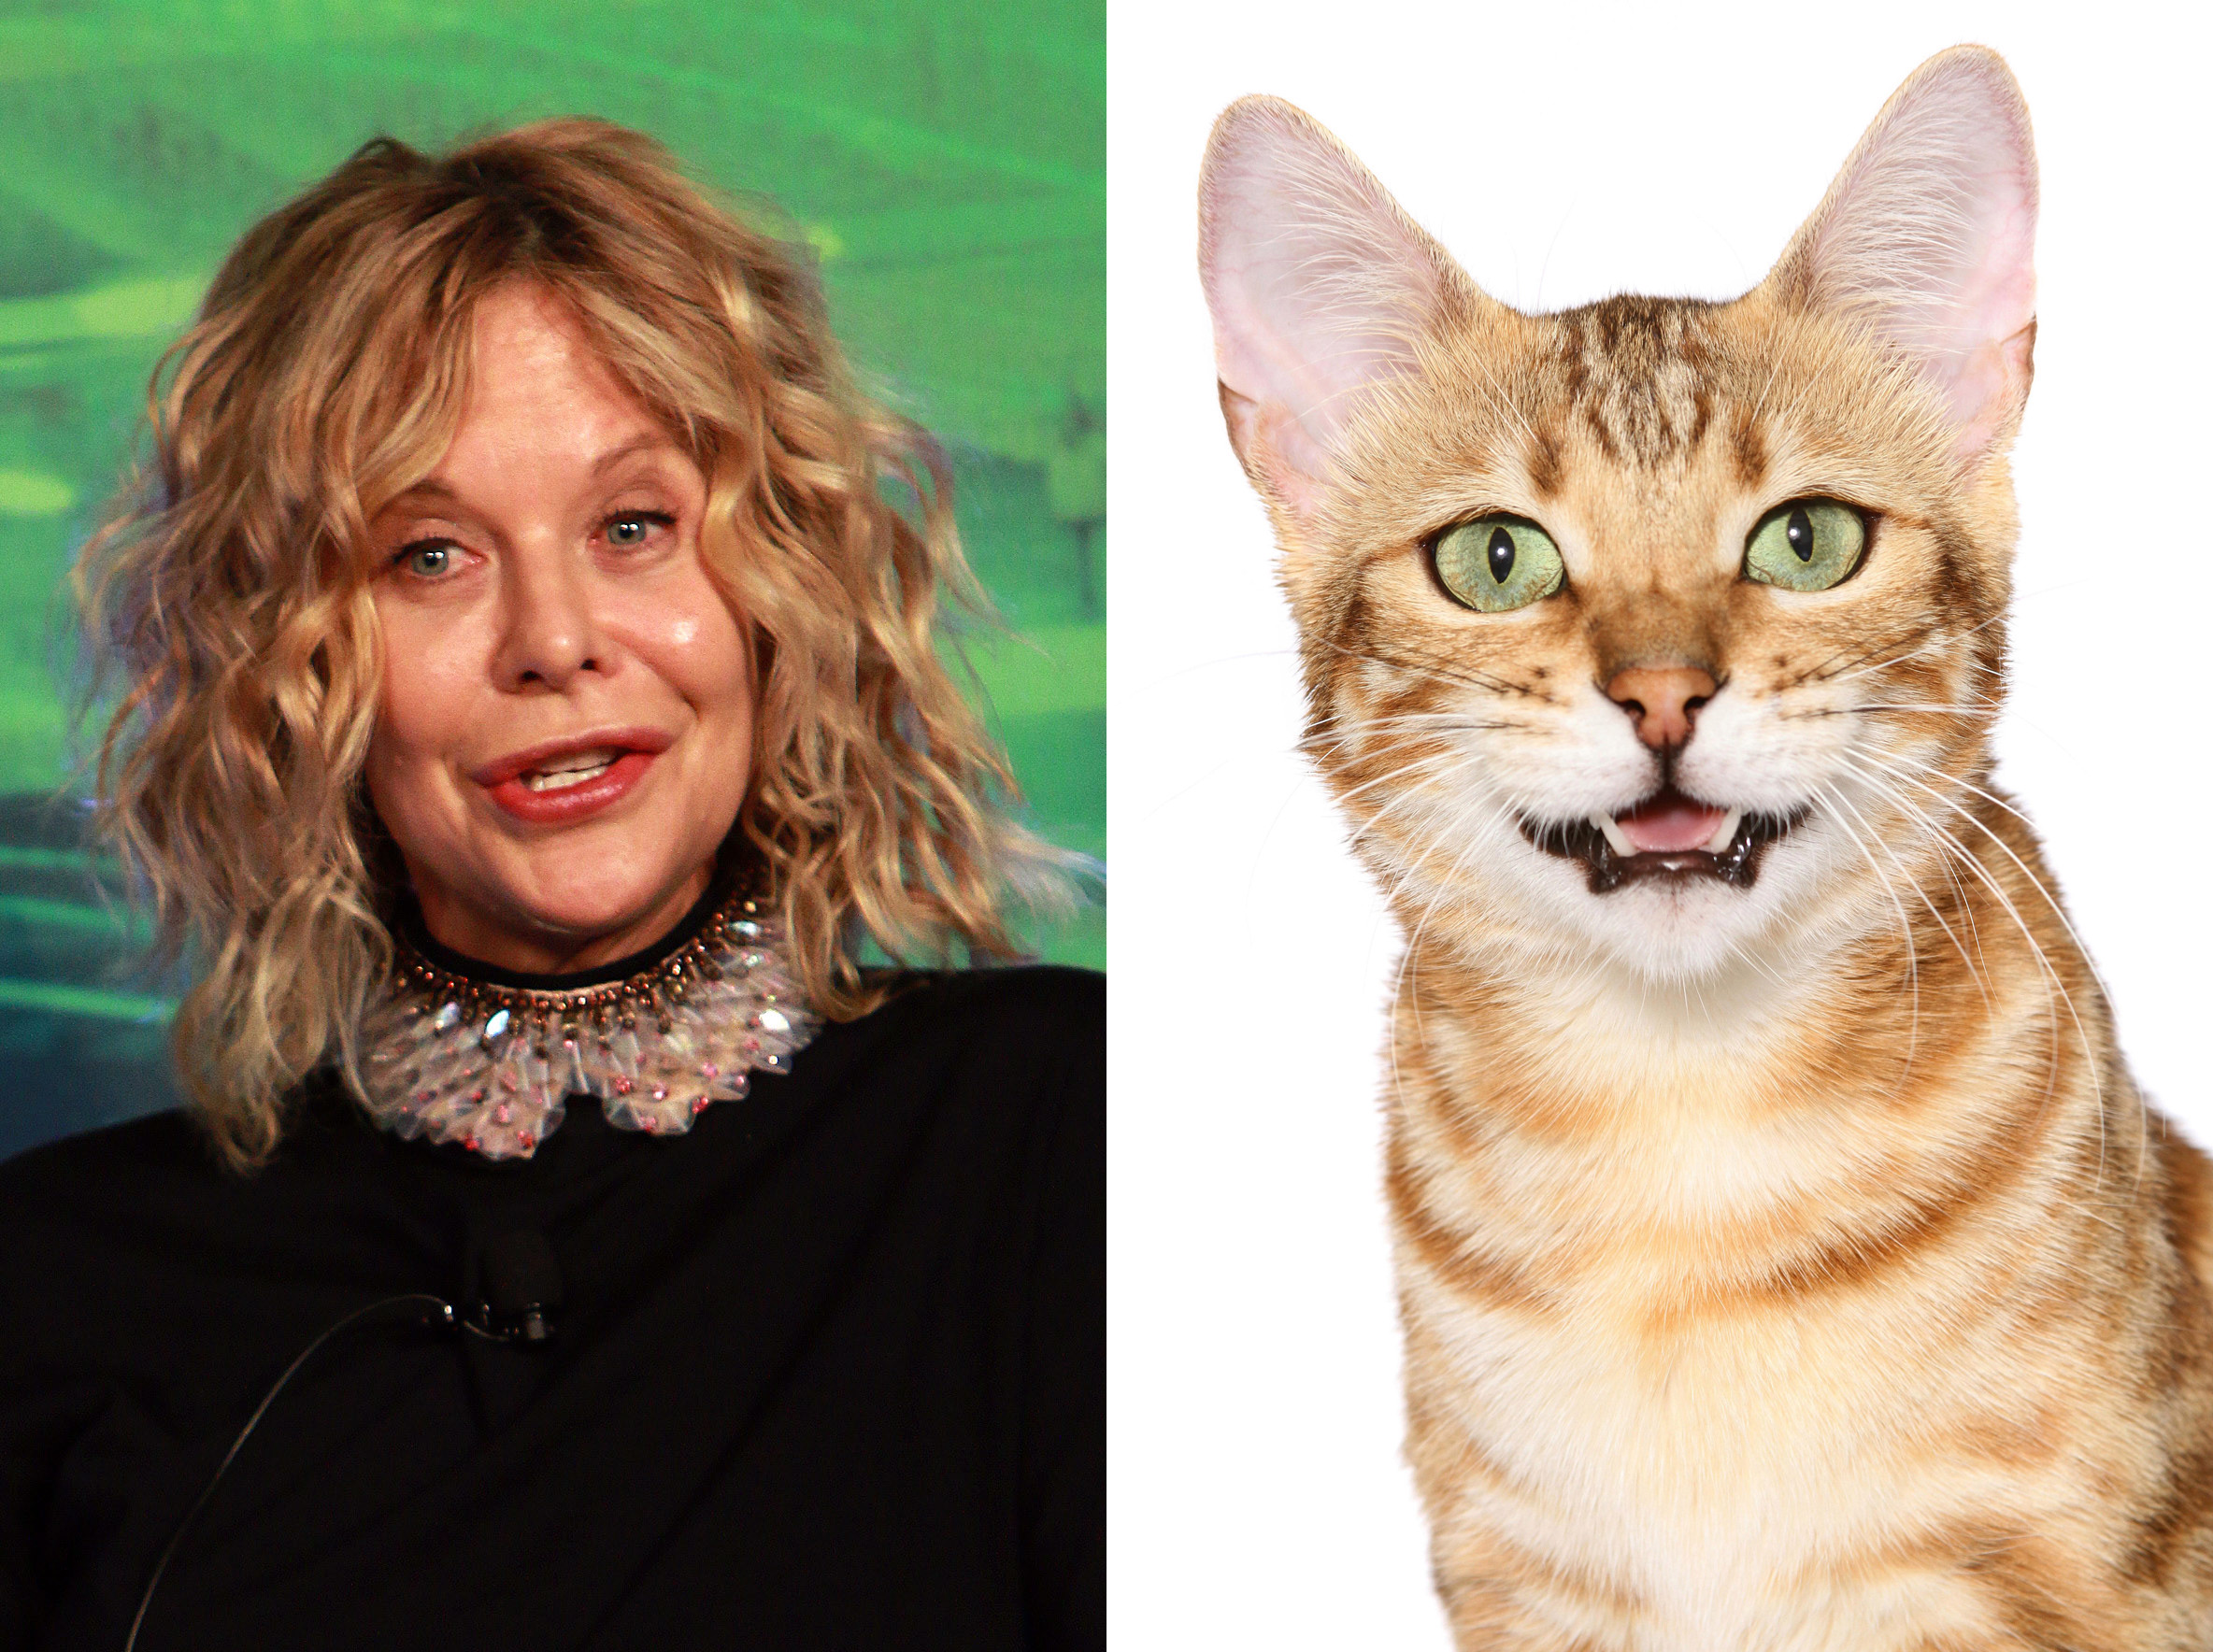 meg ryan katie price and carla bruni look like cats after plastic